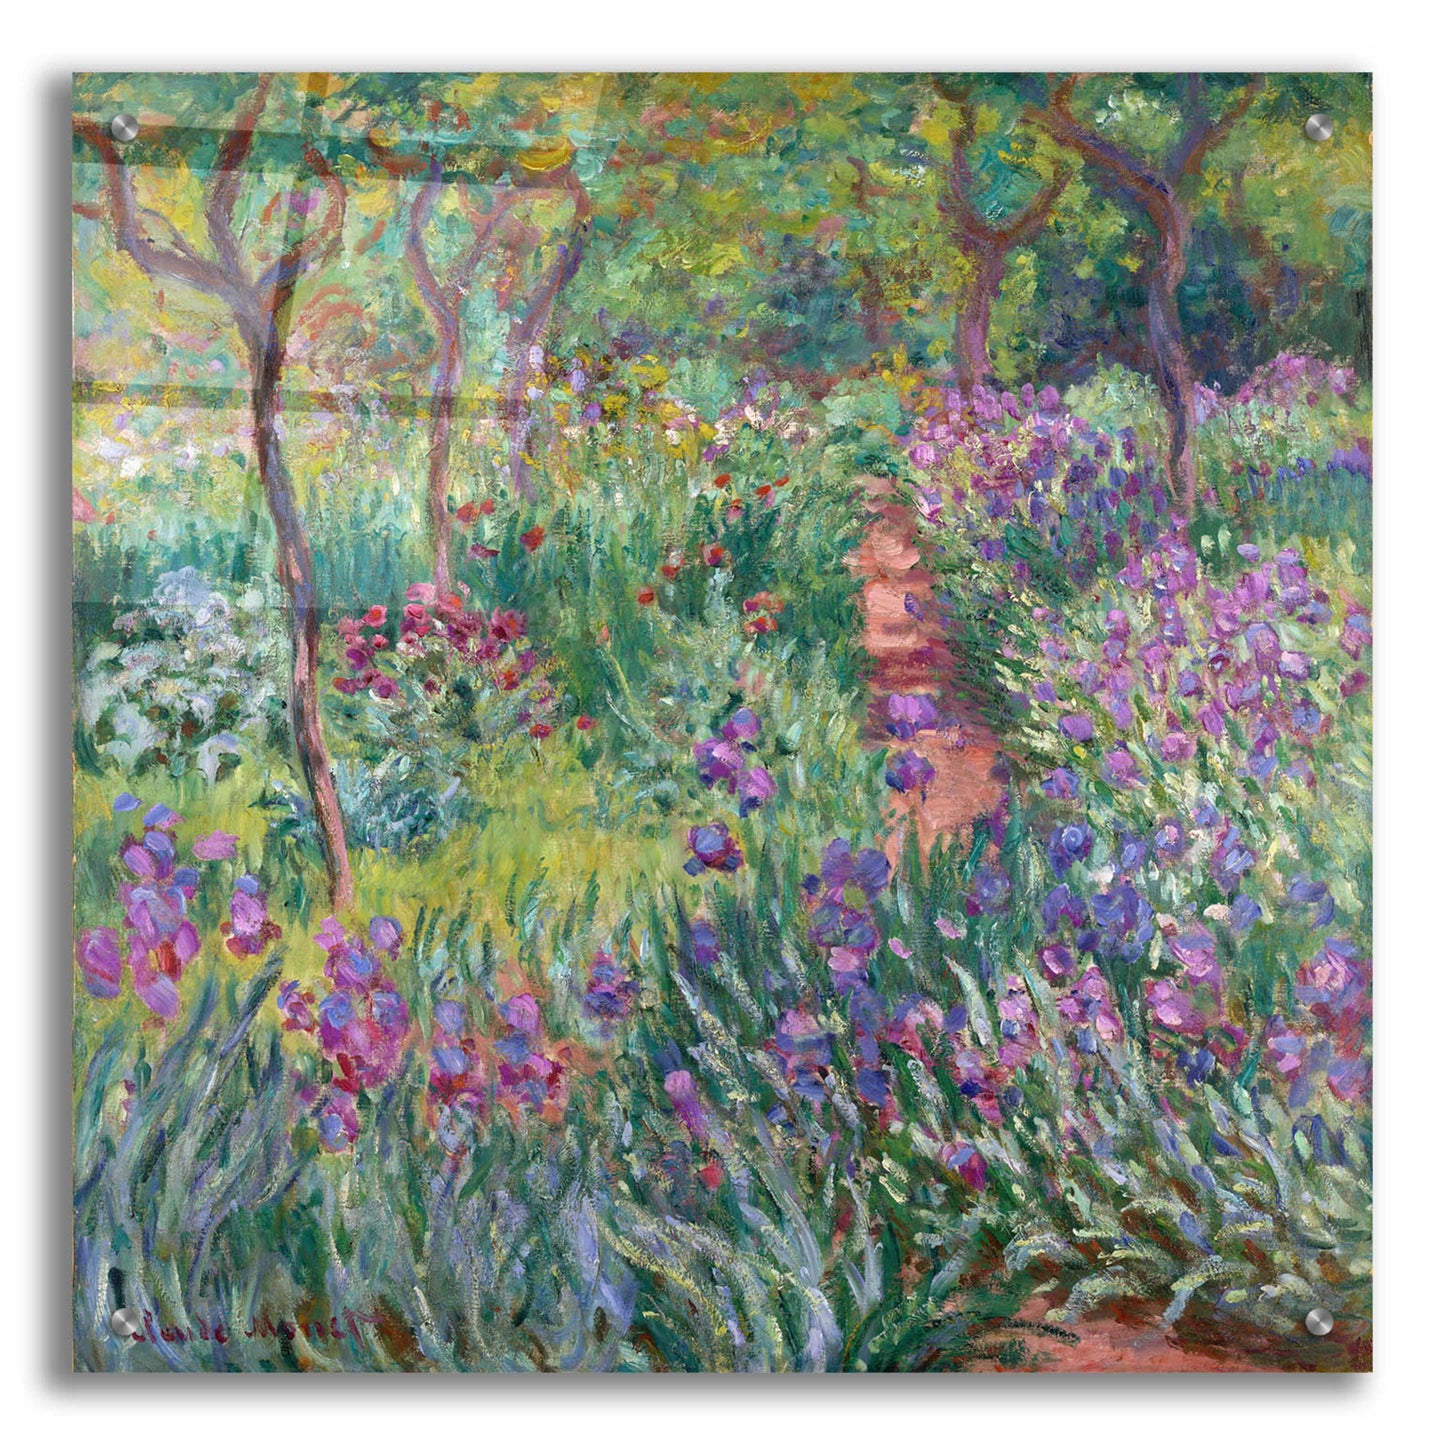 Epic Art 'The Artist’s Garden In Giverny' by Claude Monet, Acrylic Glass Wall Art,24x24